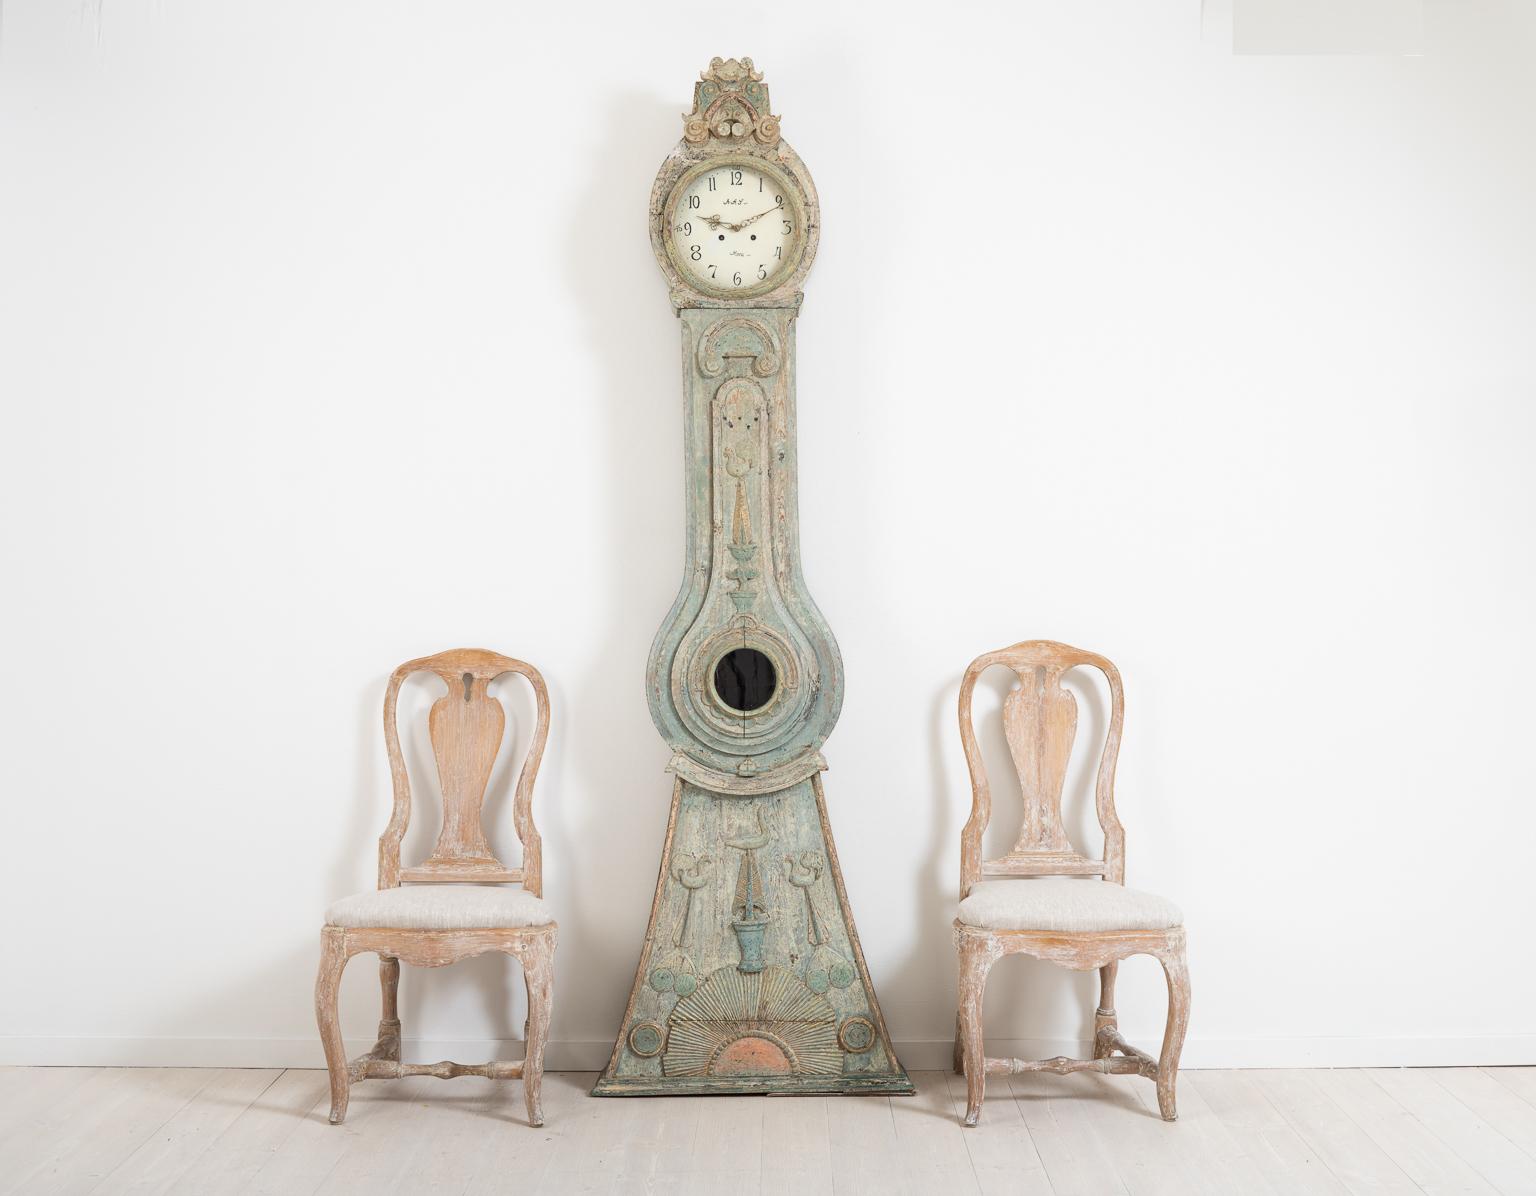 Long case clock from Norrbotten in northern Sweden. The clock is manufactured circa 1790-1800 and made from painted Swedish pine. Dry scarped to the original light turquoise paint. The clock is decorated with unusual carved wooden decorations such